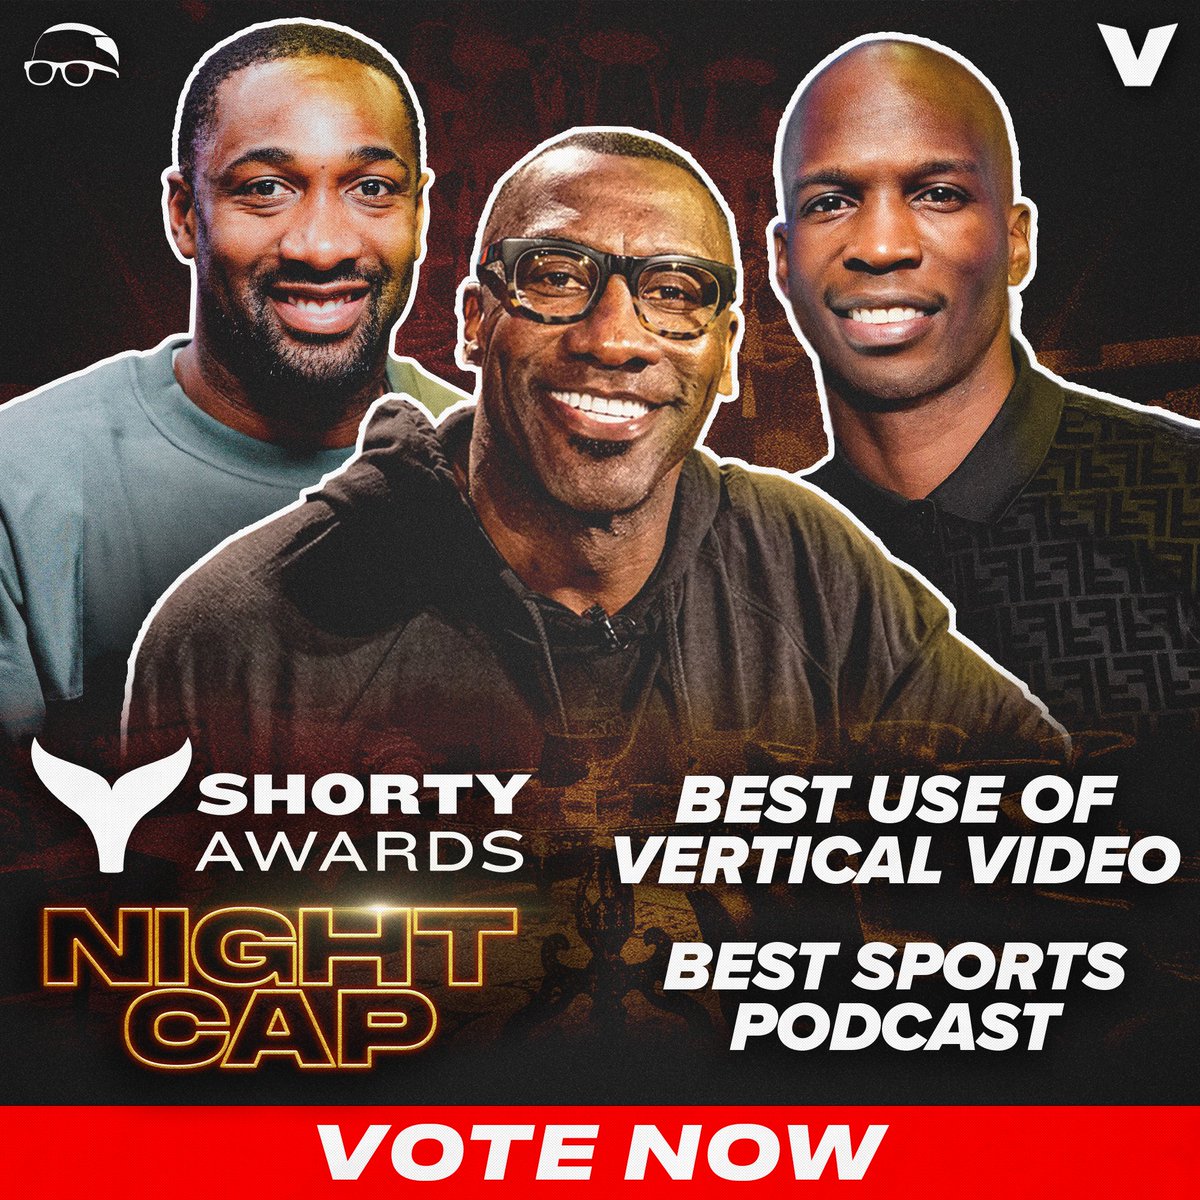 Don't forget to vote for @ShannonSharpe + @ShayShayMedia_ and the rest of the @NightcapShow_ crew @ochocinco + @GilsArenaShow for TWO @shortyawards 🏆🏆 shortyawards.com/16th/club-shay… shortyawards.com/16th/nightcap-…